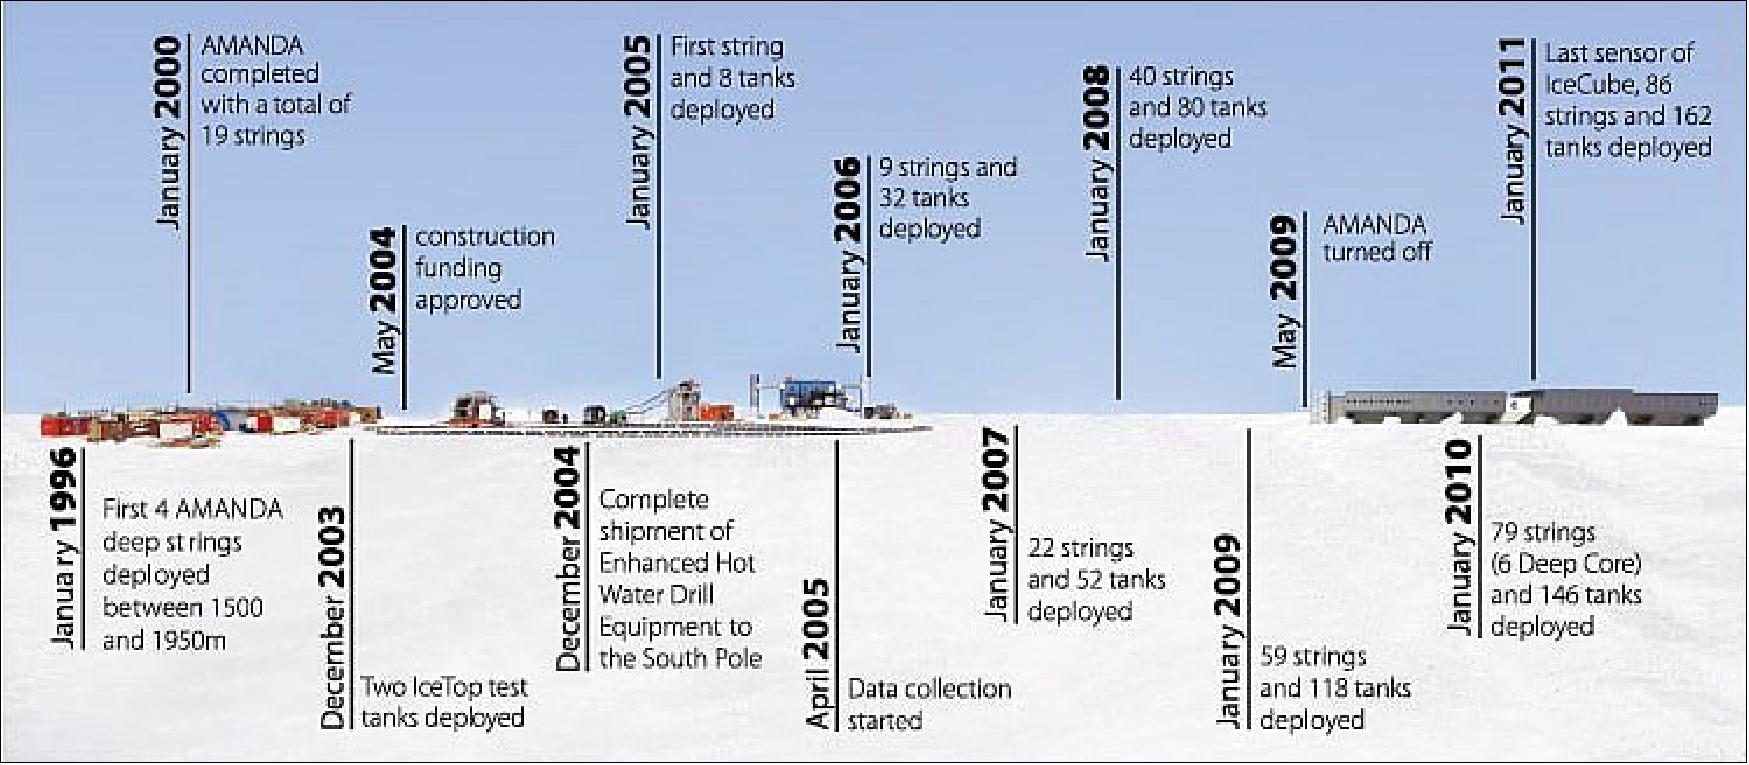 Figure 3: Overview of the IceCube implementation phases (image credit: IceCube Collaboration)